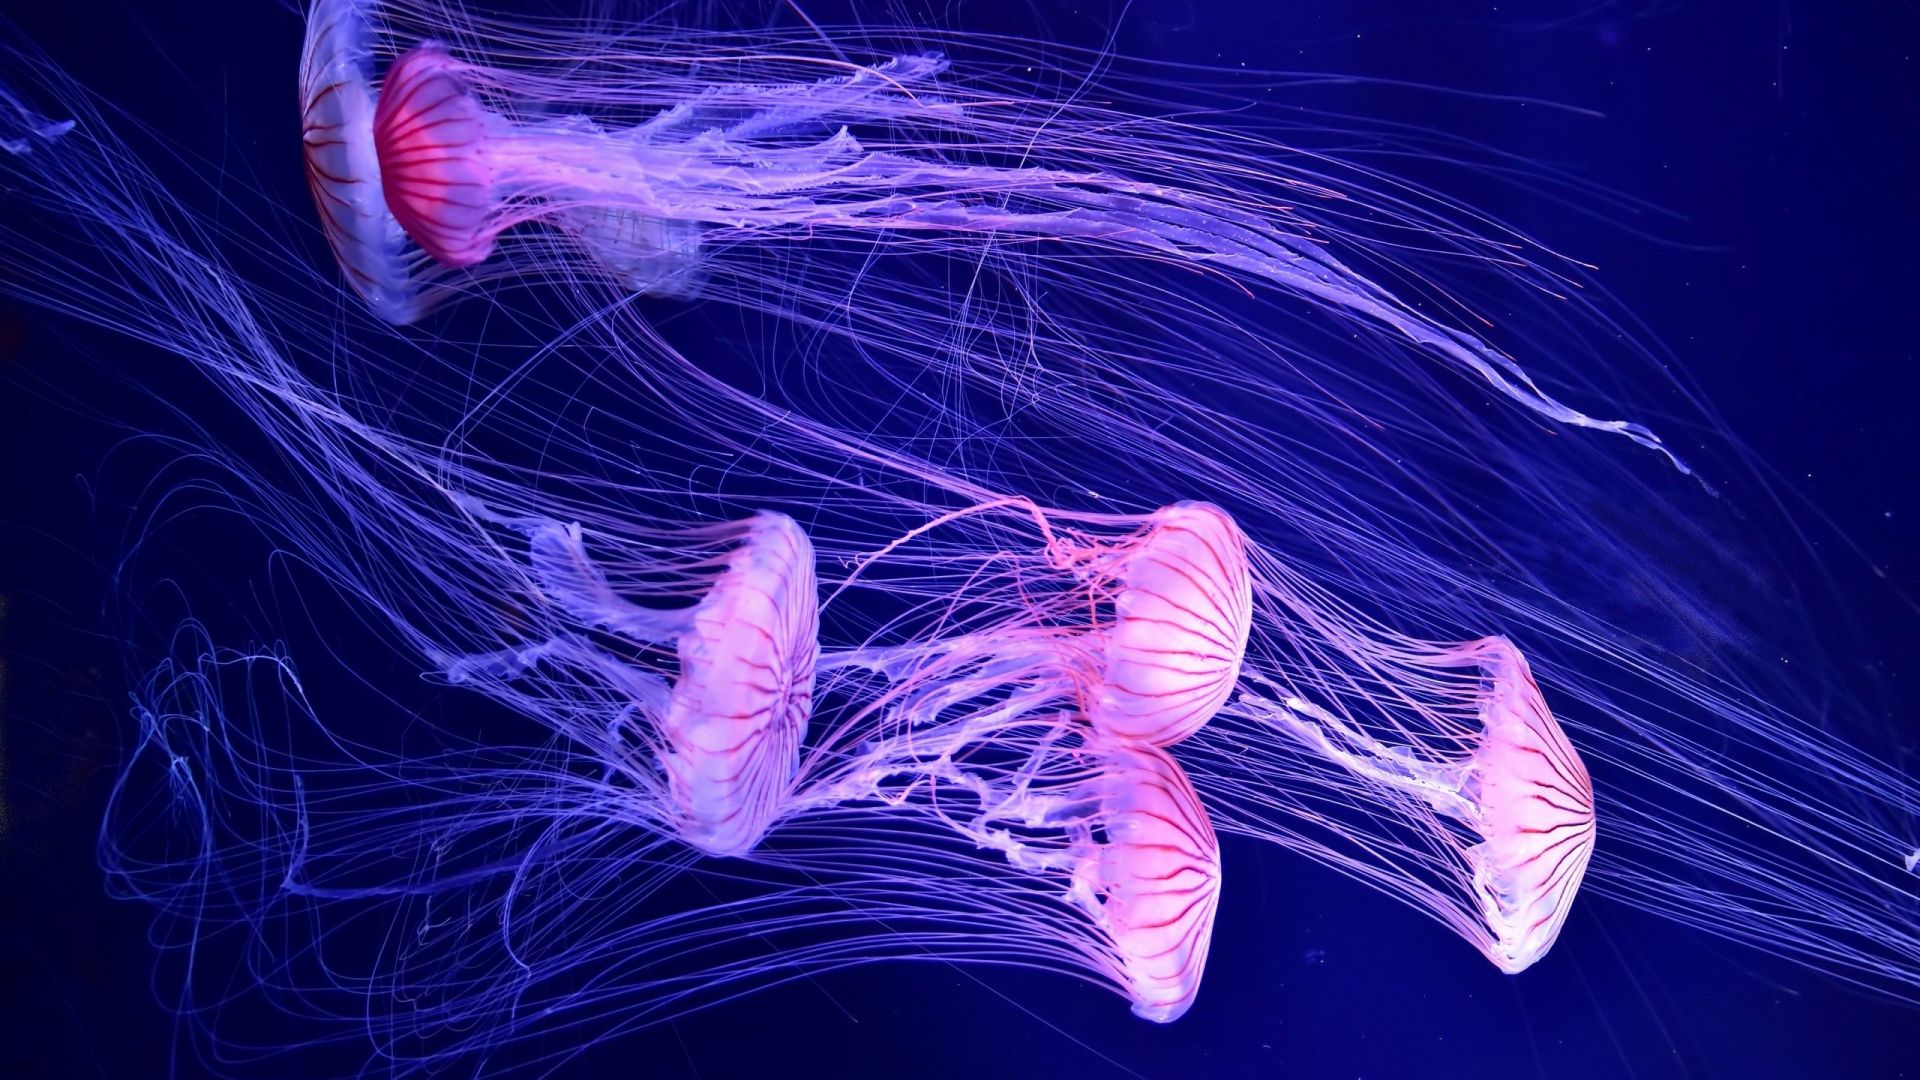 Wallpaper Amazing jelly fish under water